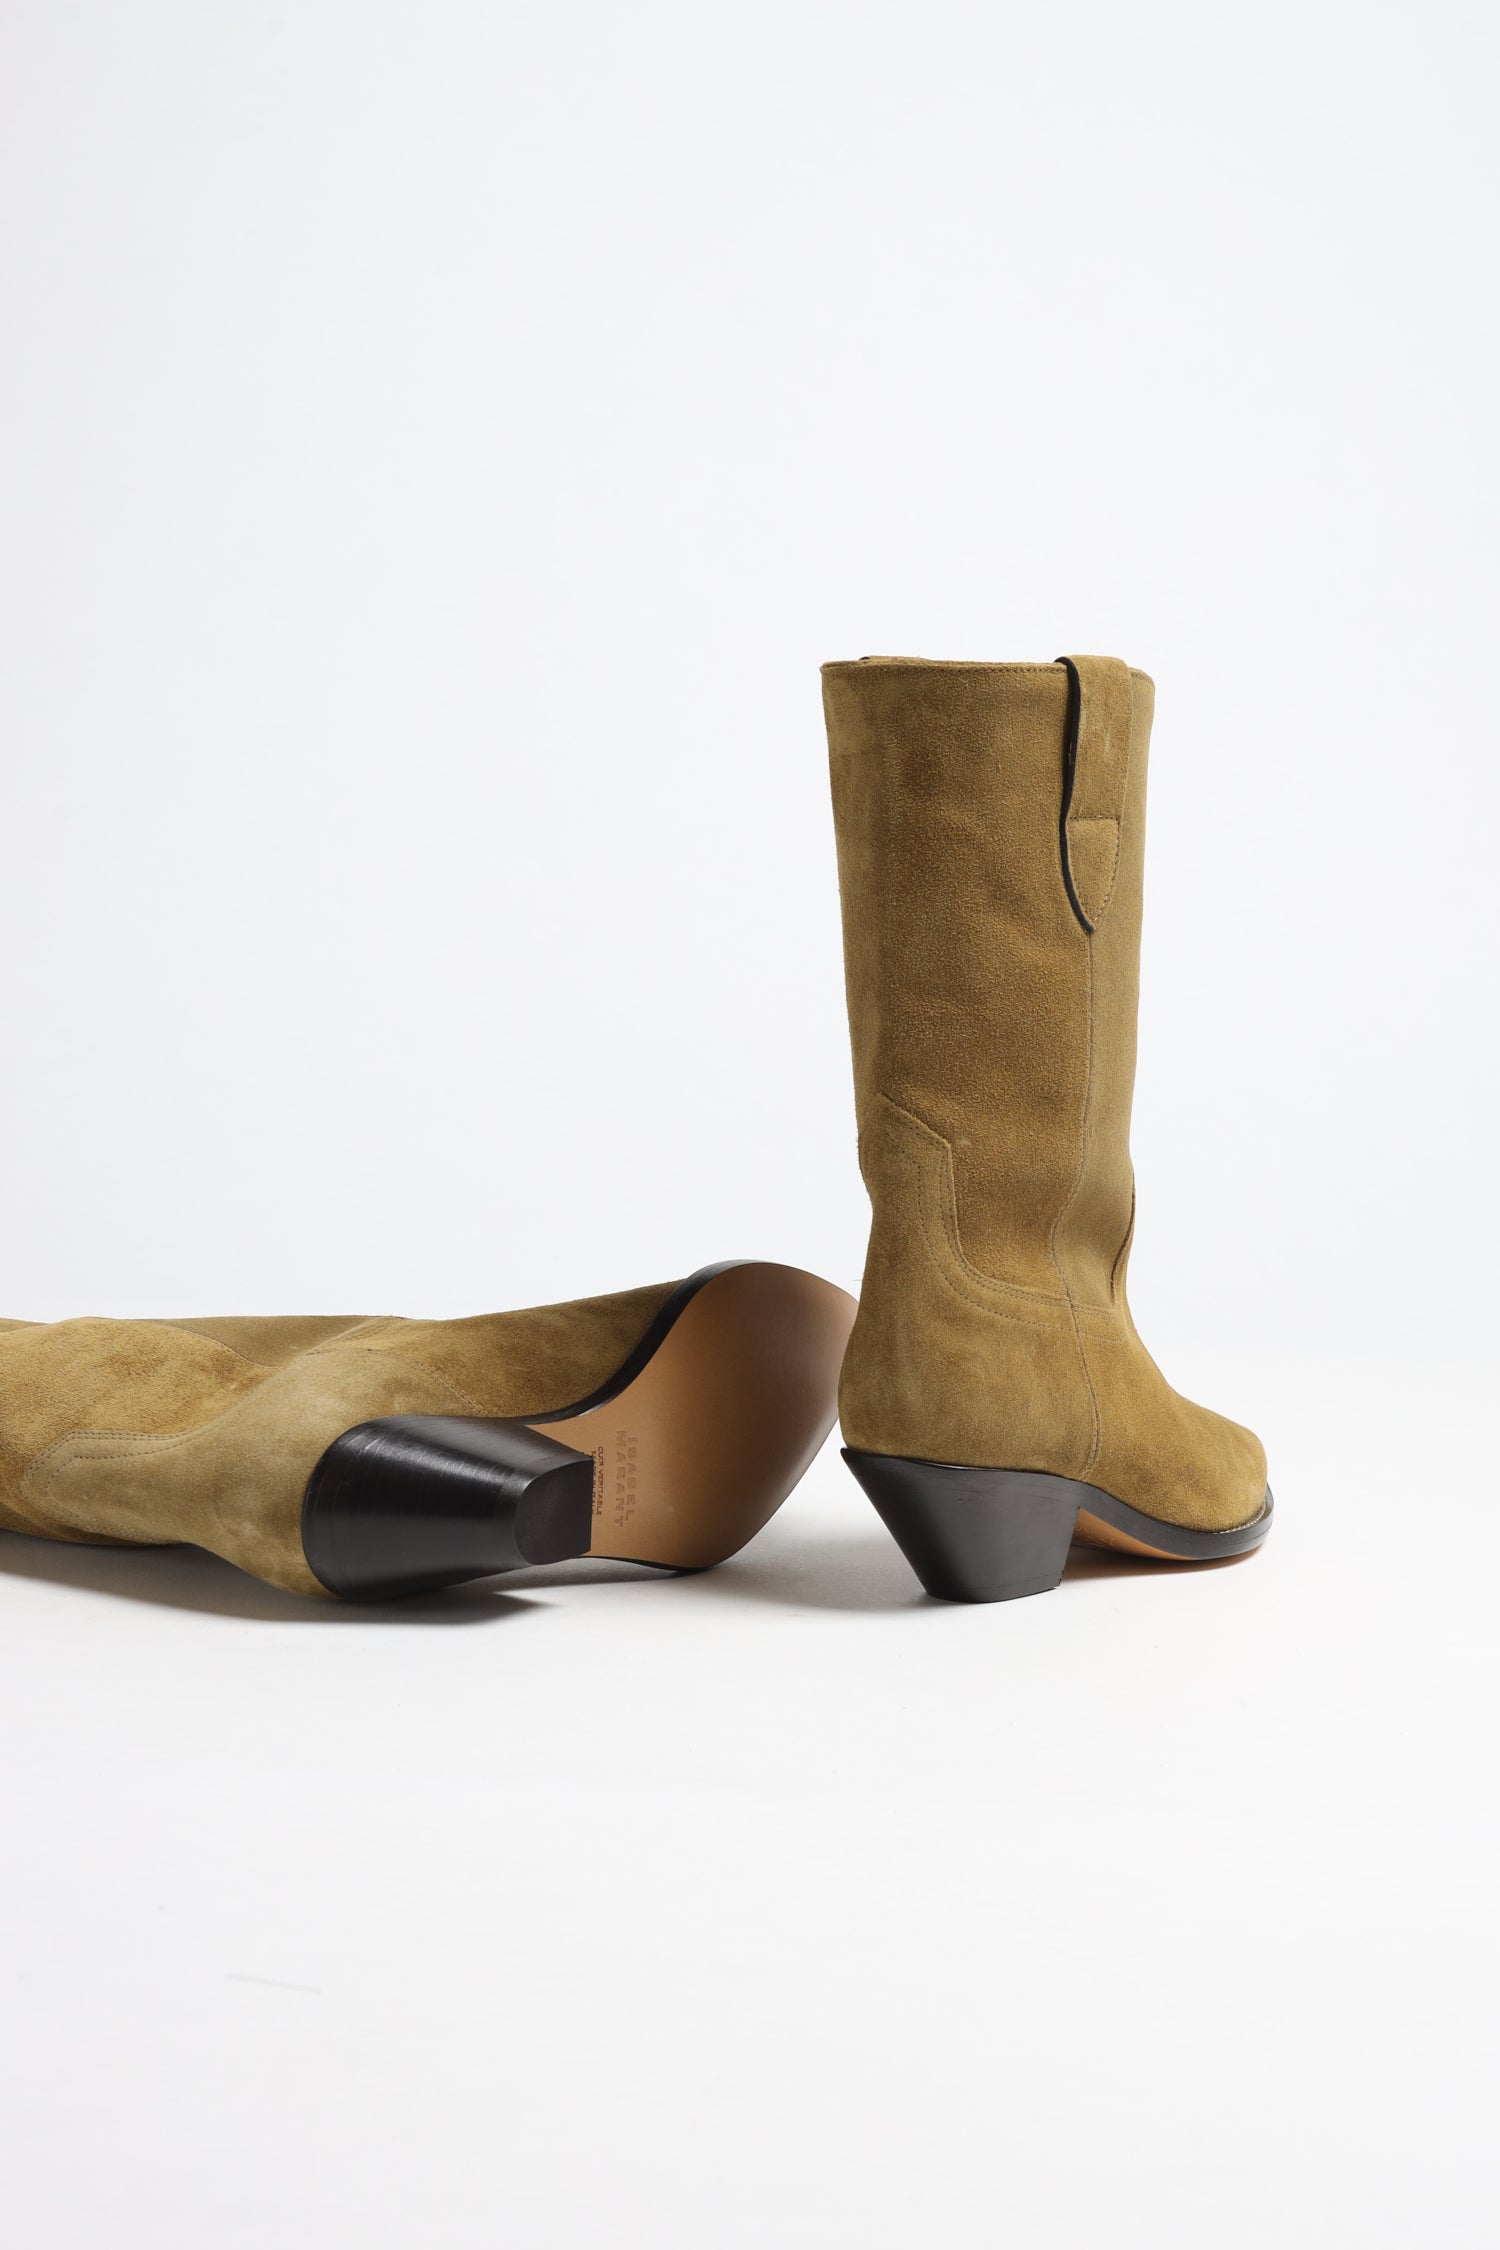 Boots Dahope in TaupeIsabel Marant - Anita Hass